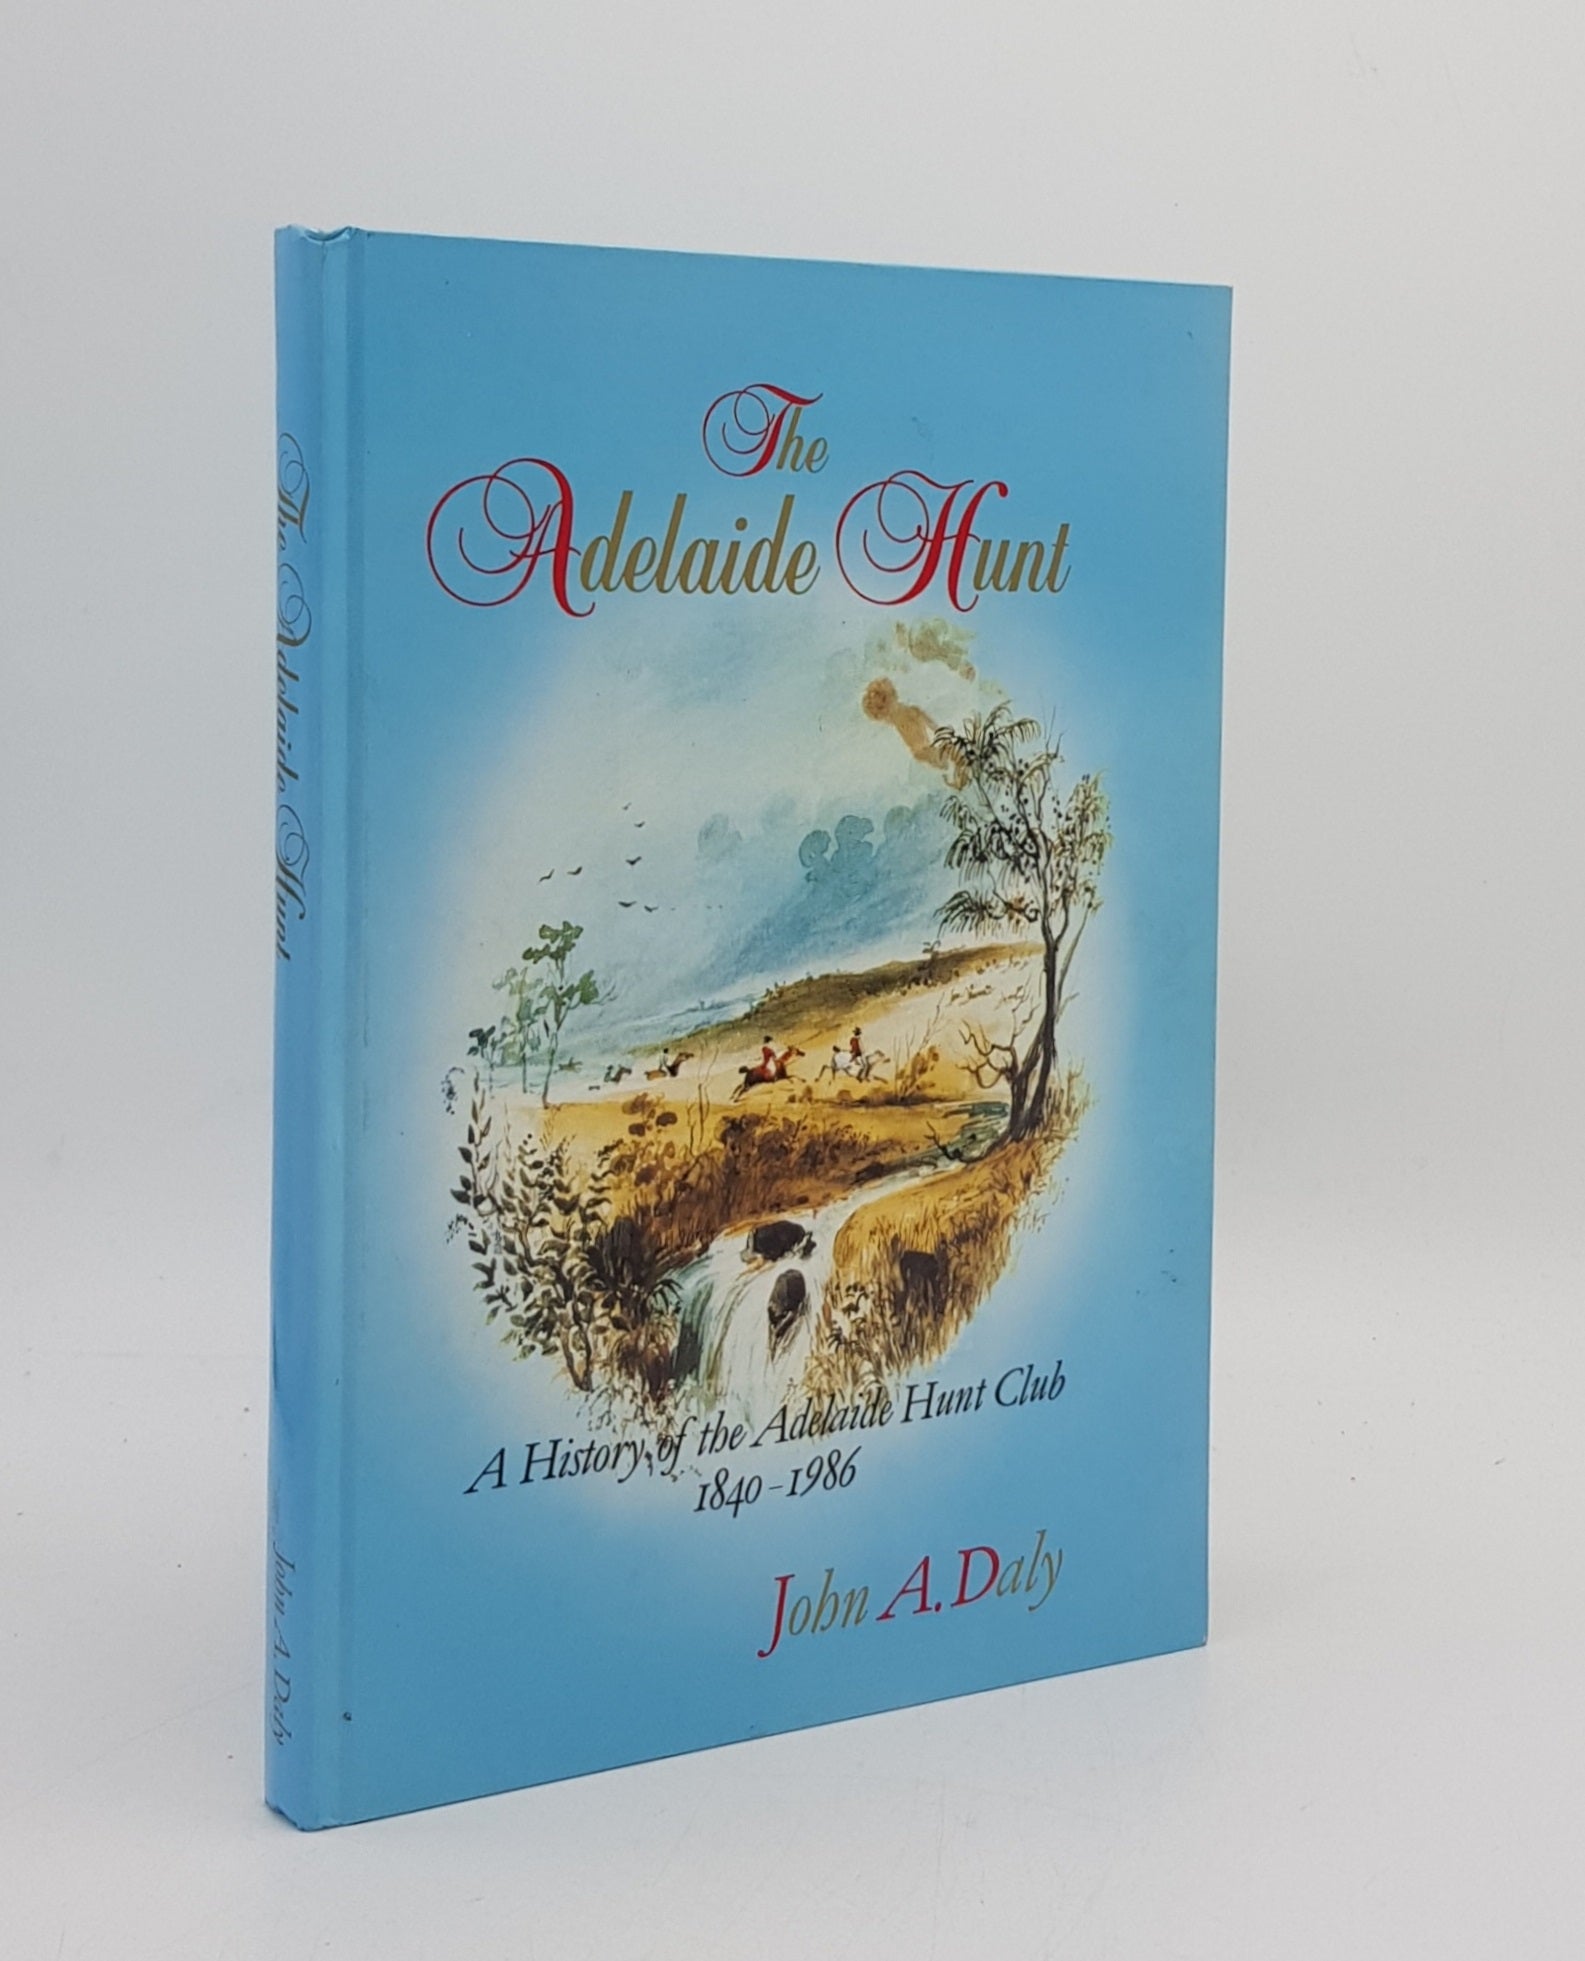 DALY John A. - The Adelaide Hunt a History of the Adelaide Hunt Club 1840-1986